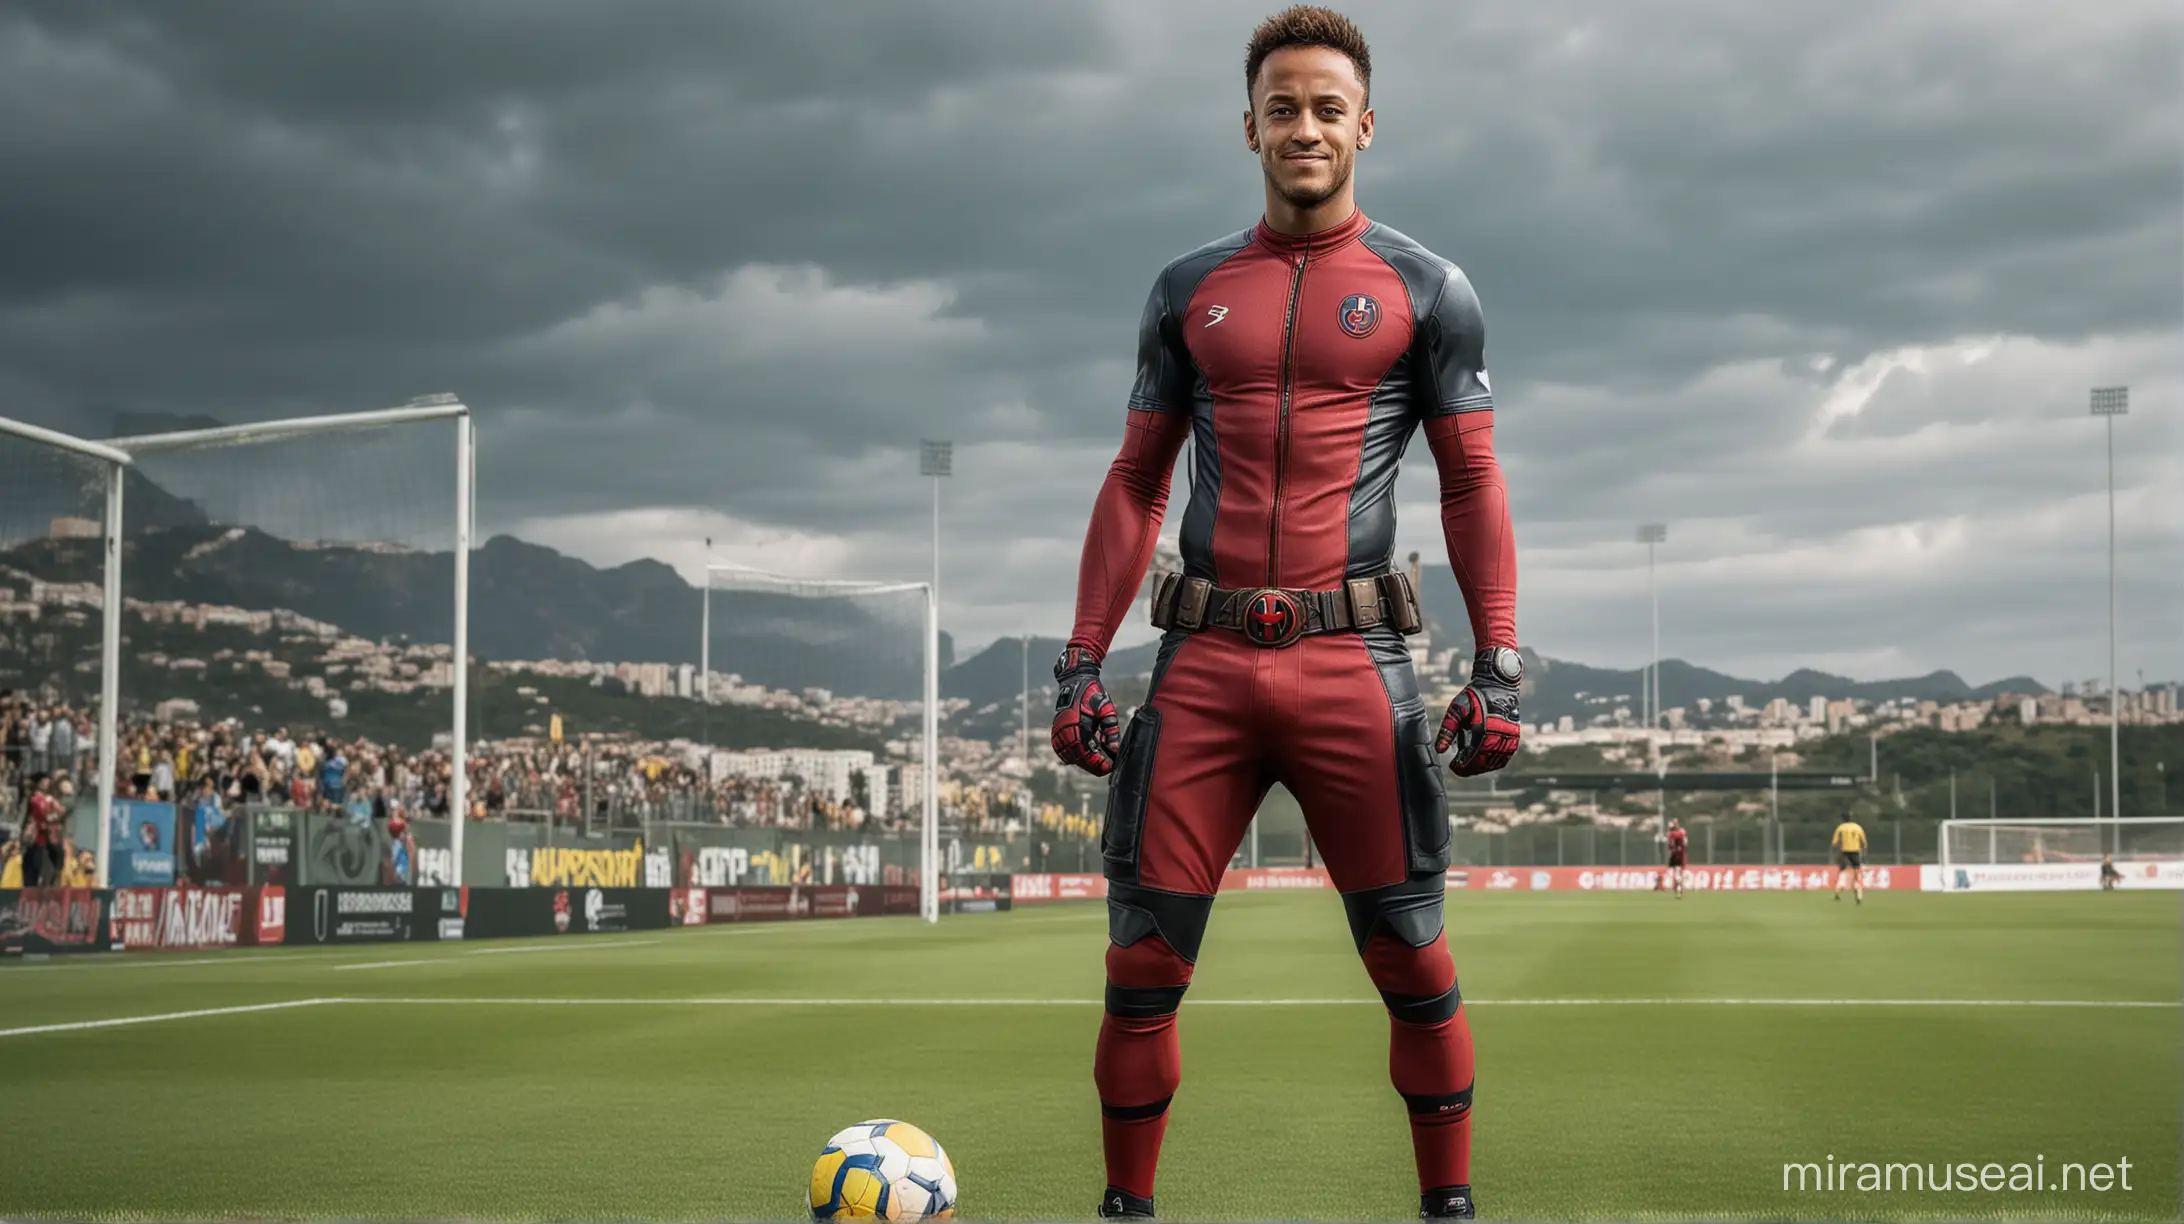 Neymar the Brazilian Soccer player transformes into the comic book superhero Deadpool, full body, looking directly at the camera, without head cover, so Smiley face, blue eyes, in the football field, he is standing with a ball next to him.